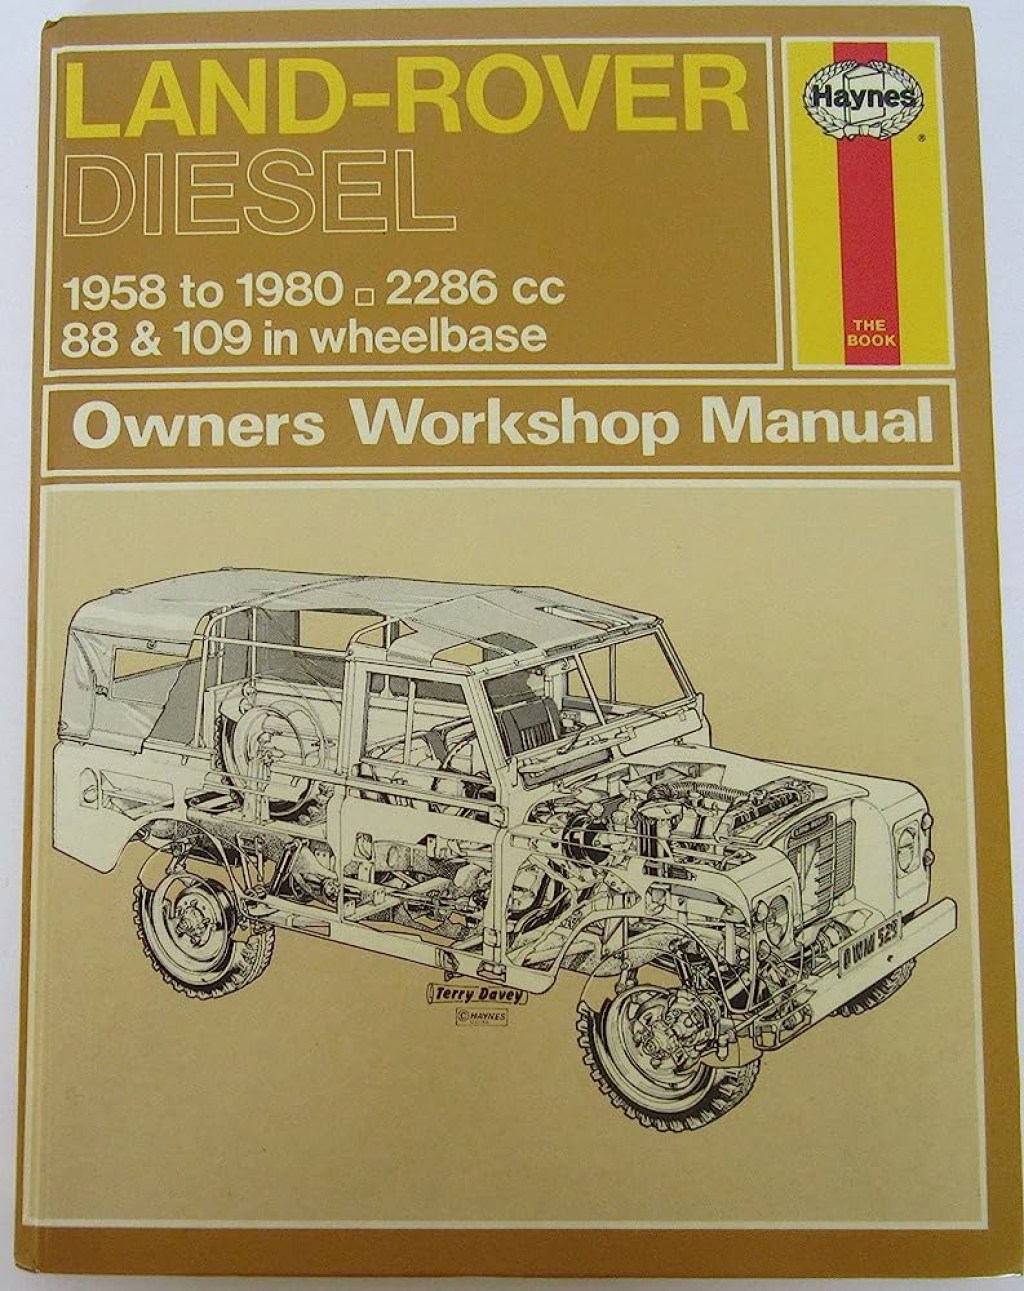 Picture of: Land Rover Diesel Owner’s Workshop Manual